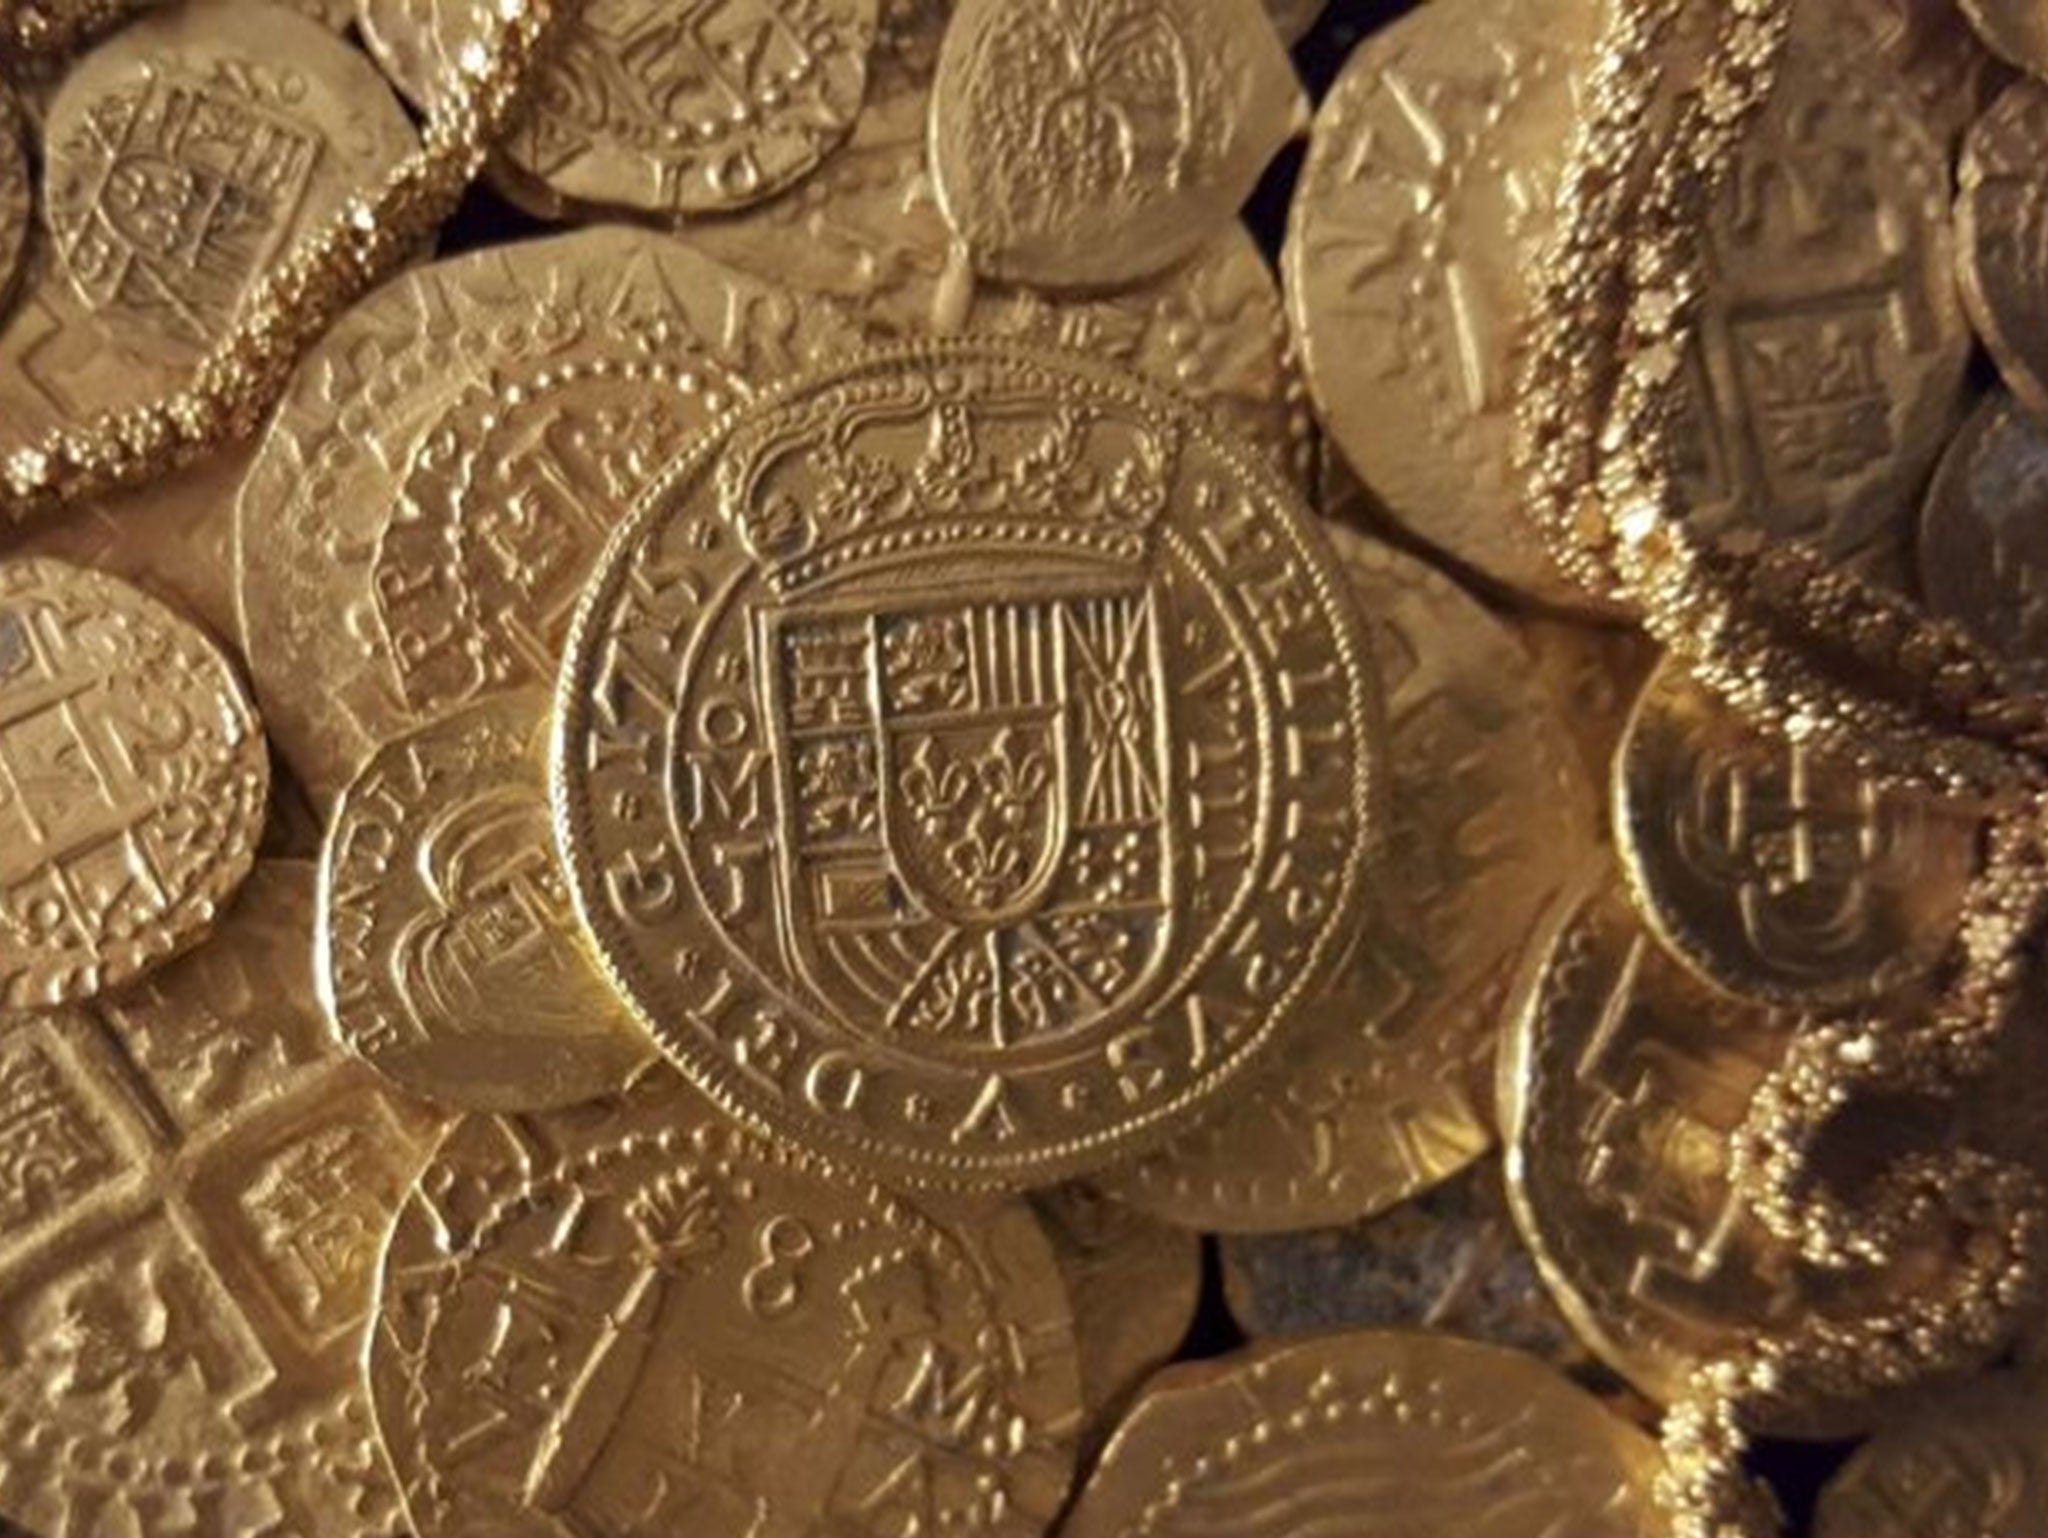 Gold coins and gold chain found in the wreckage of a 1715 Spanish fleet that sunk in the Atlantic off the Florida coast